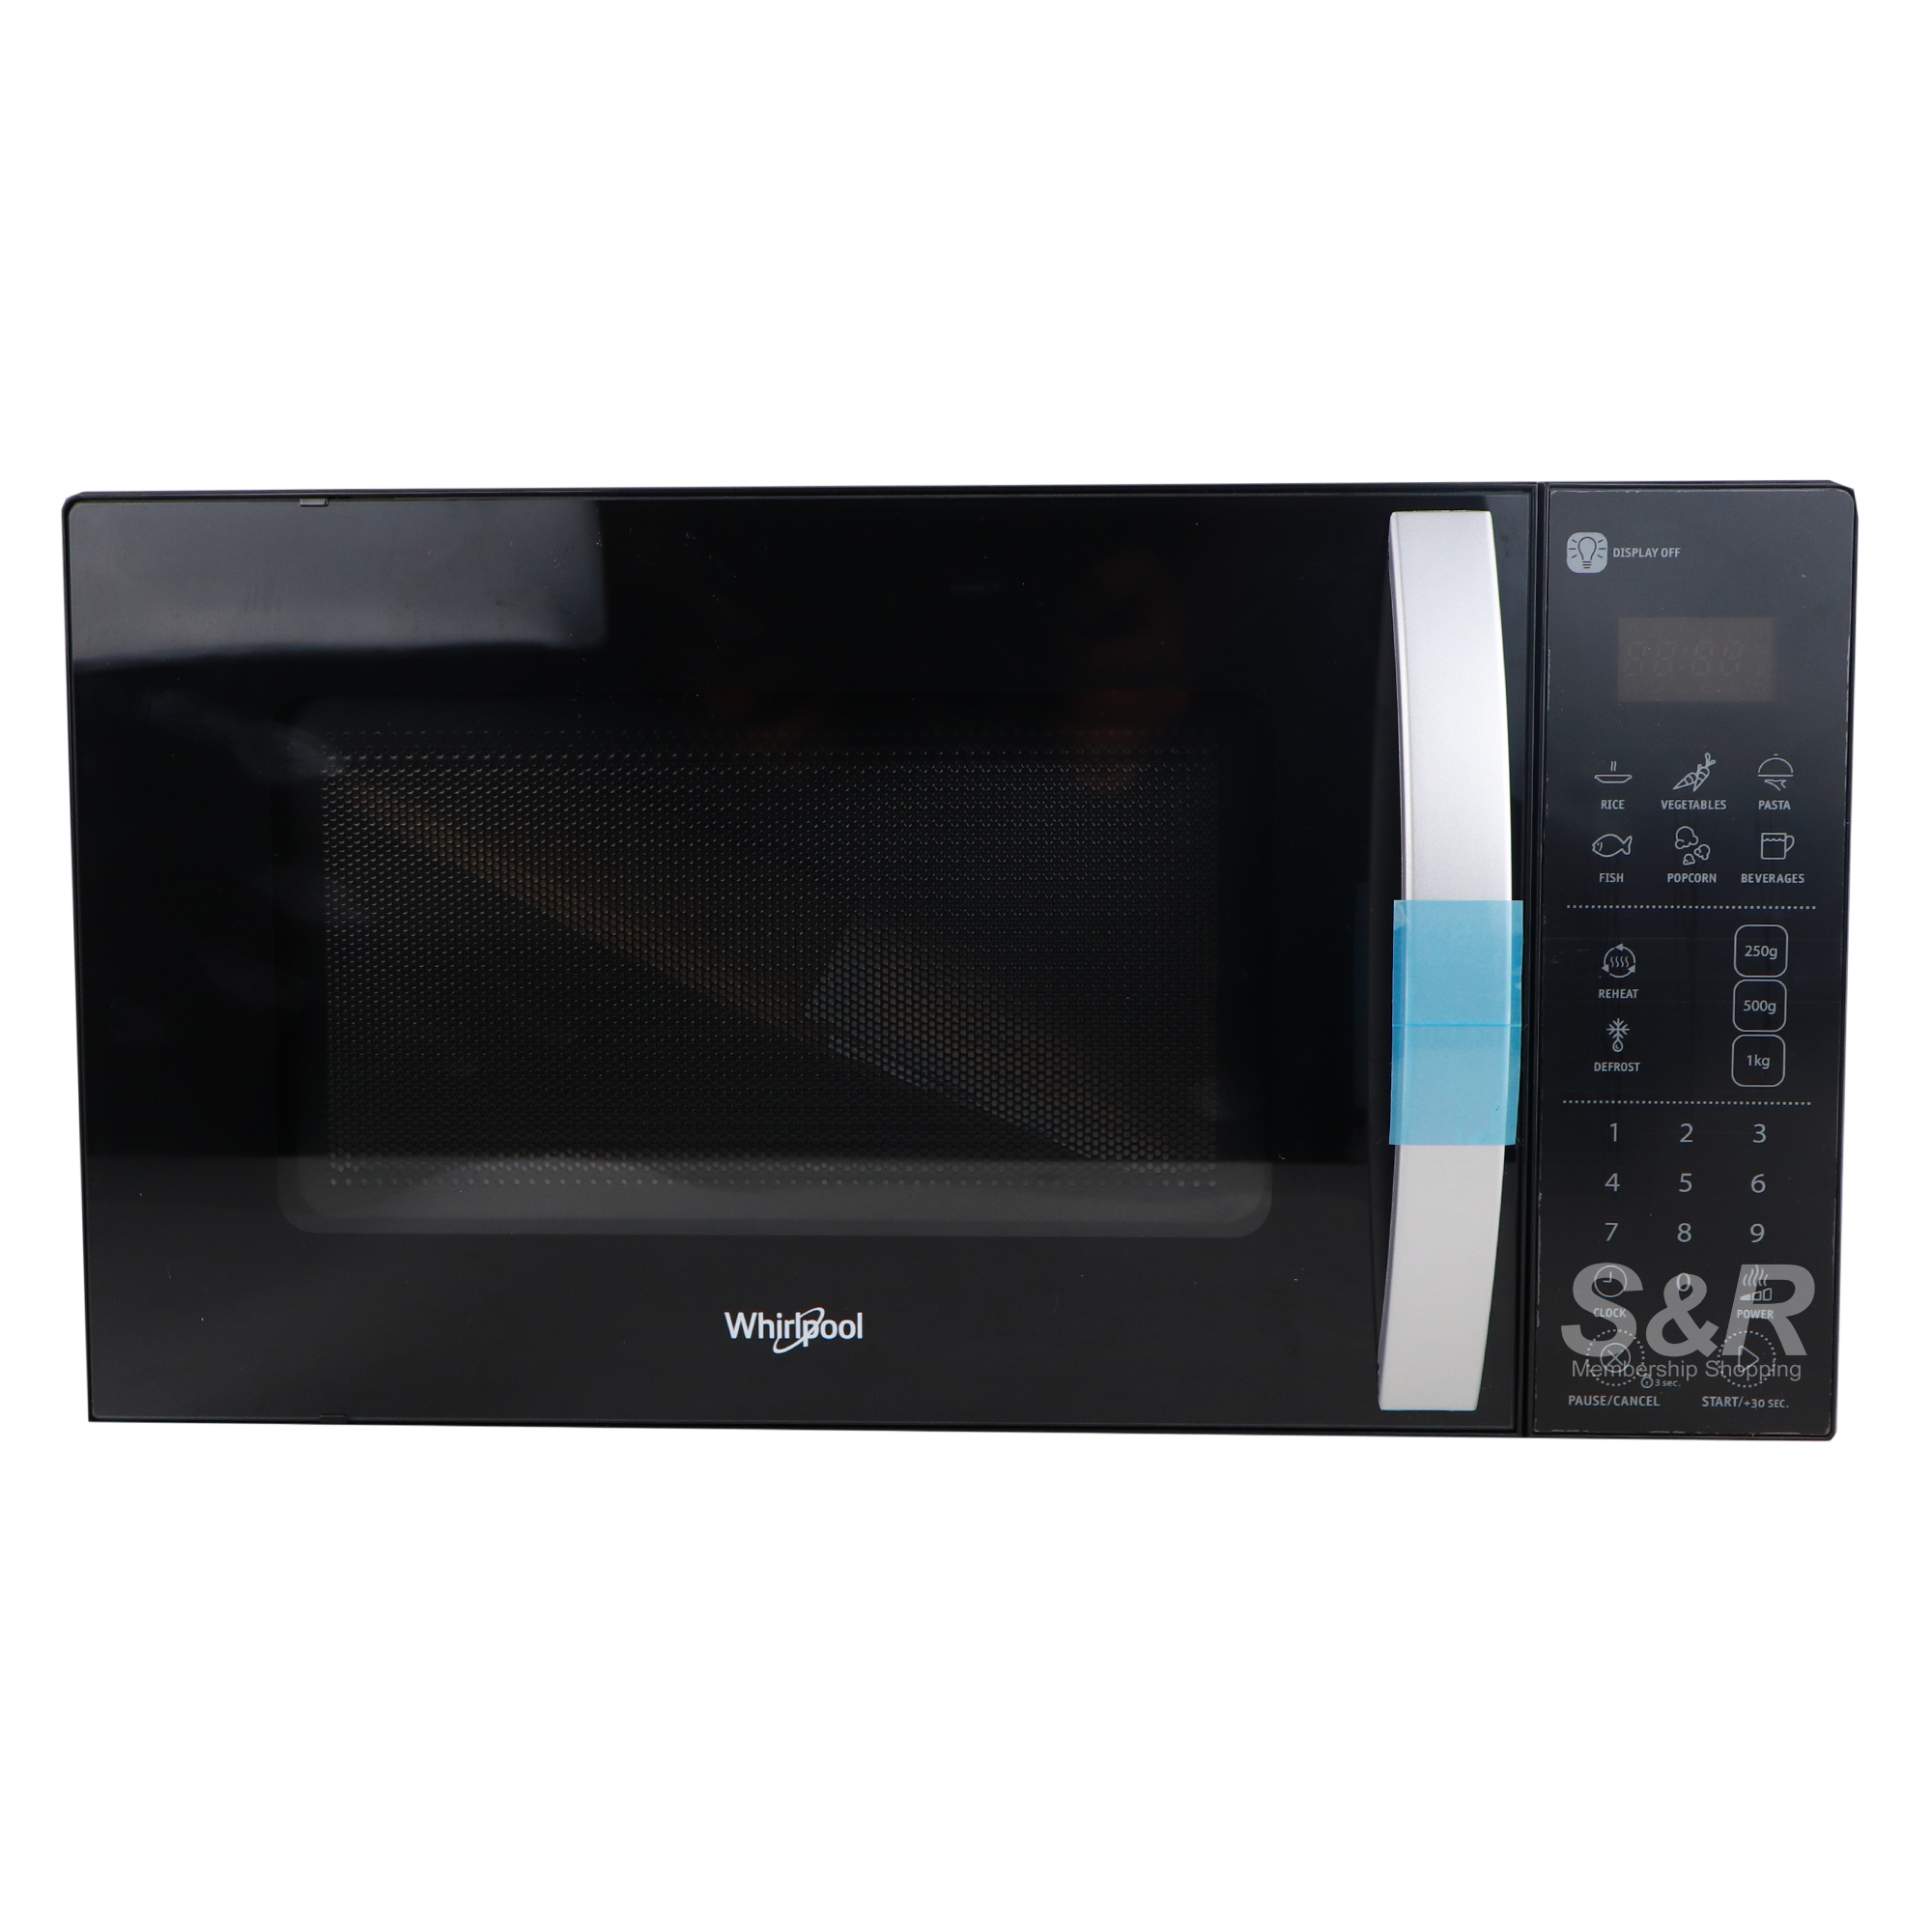 Whirlpool Microwave Oven MWX203-BL